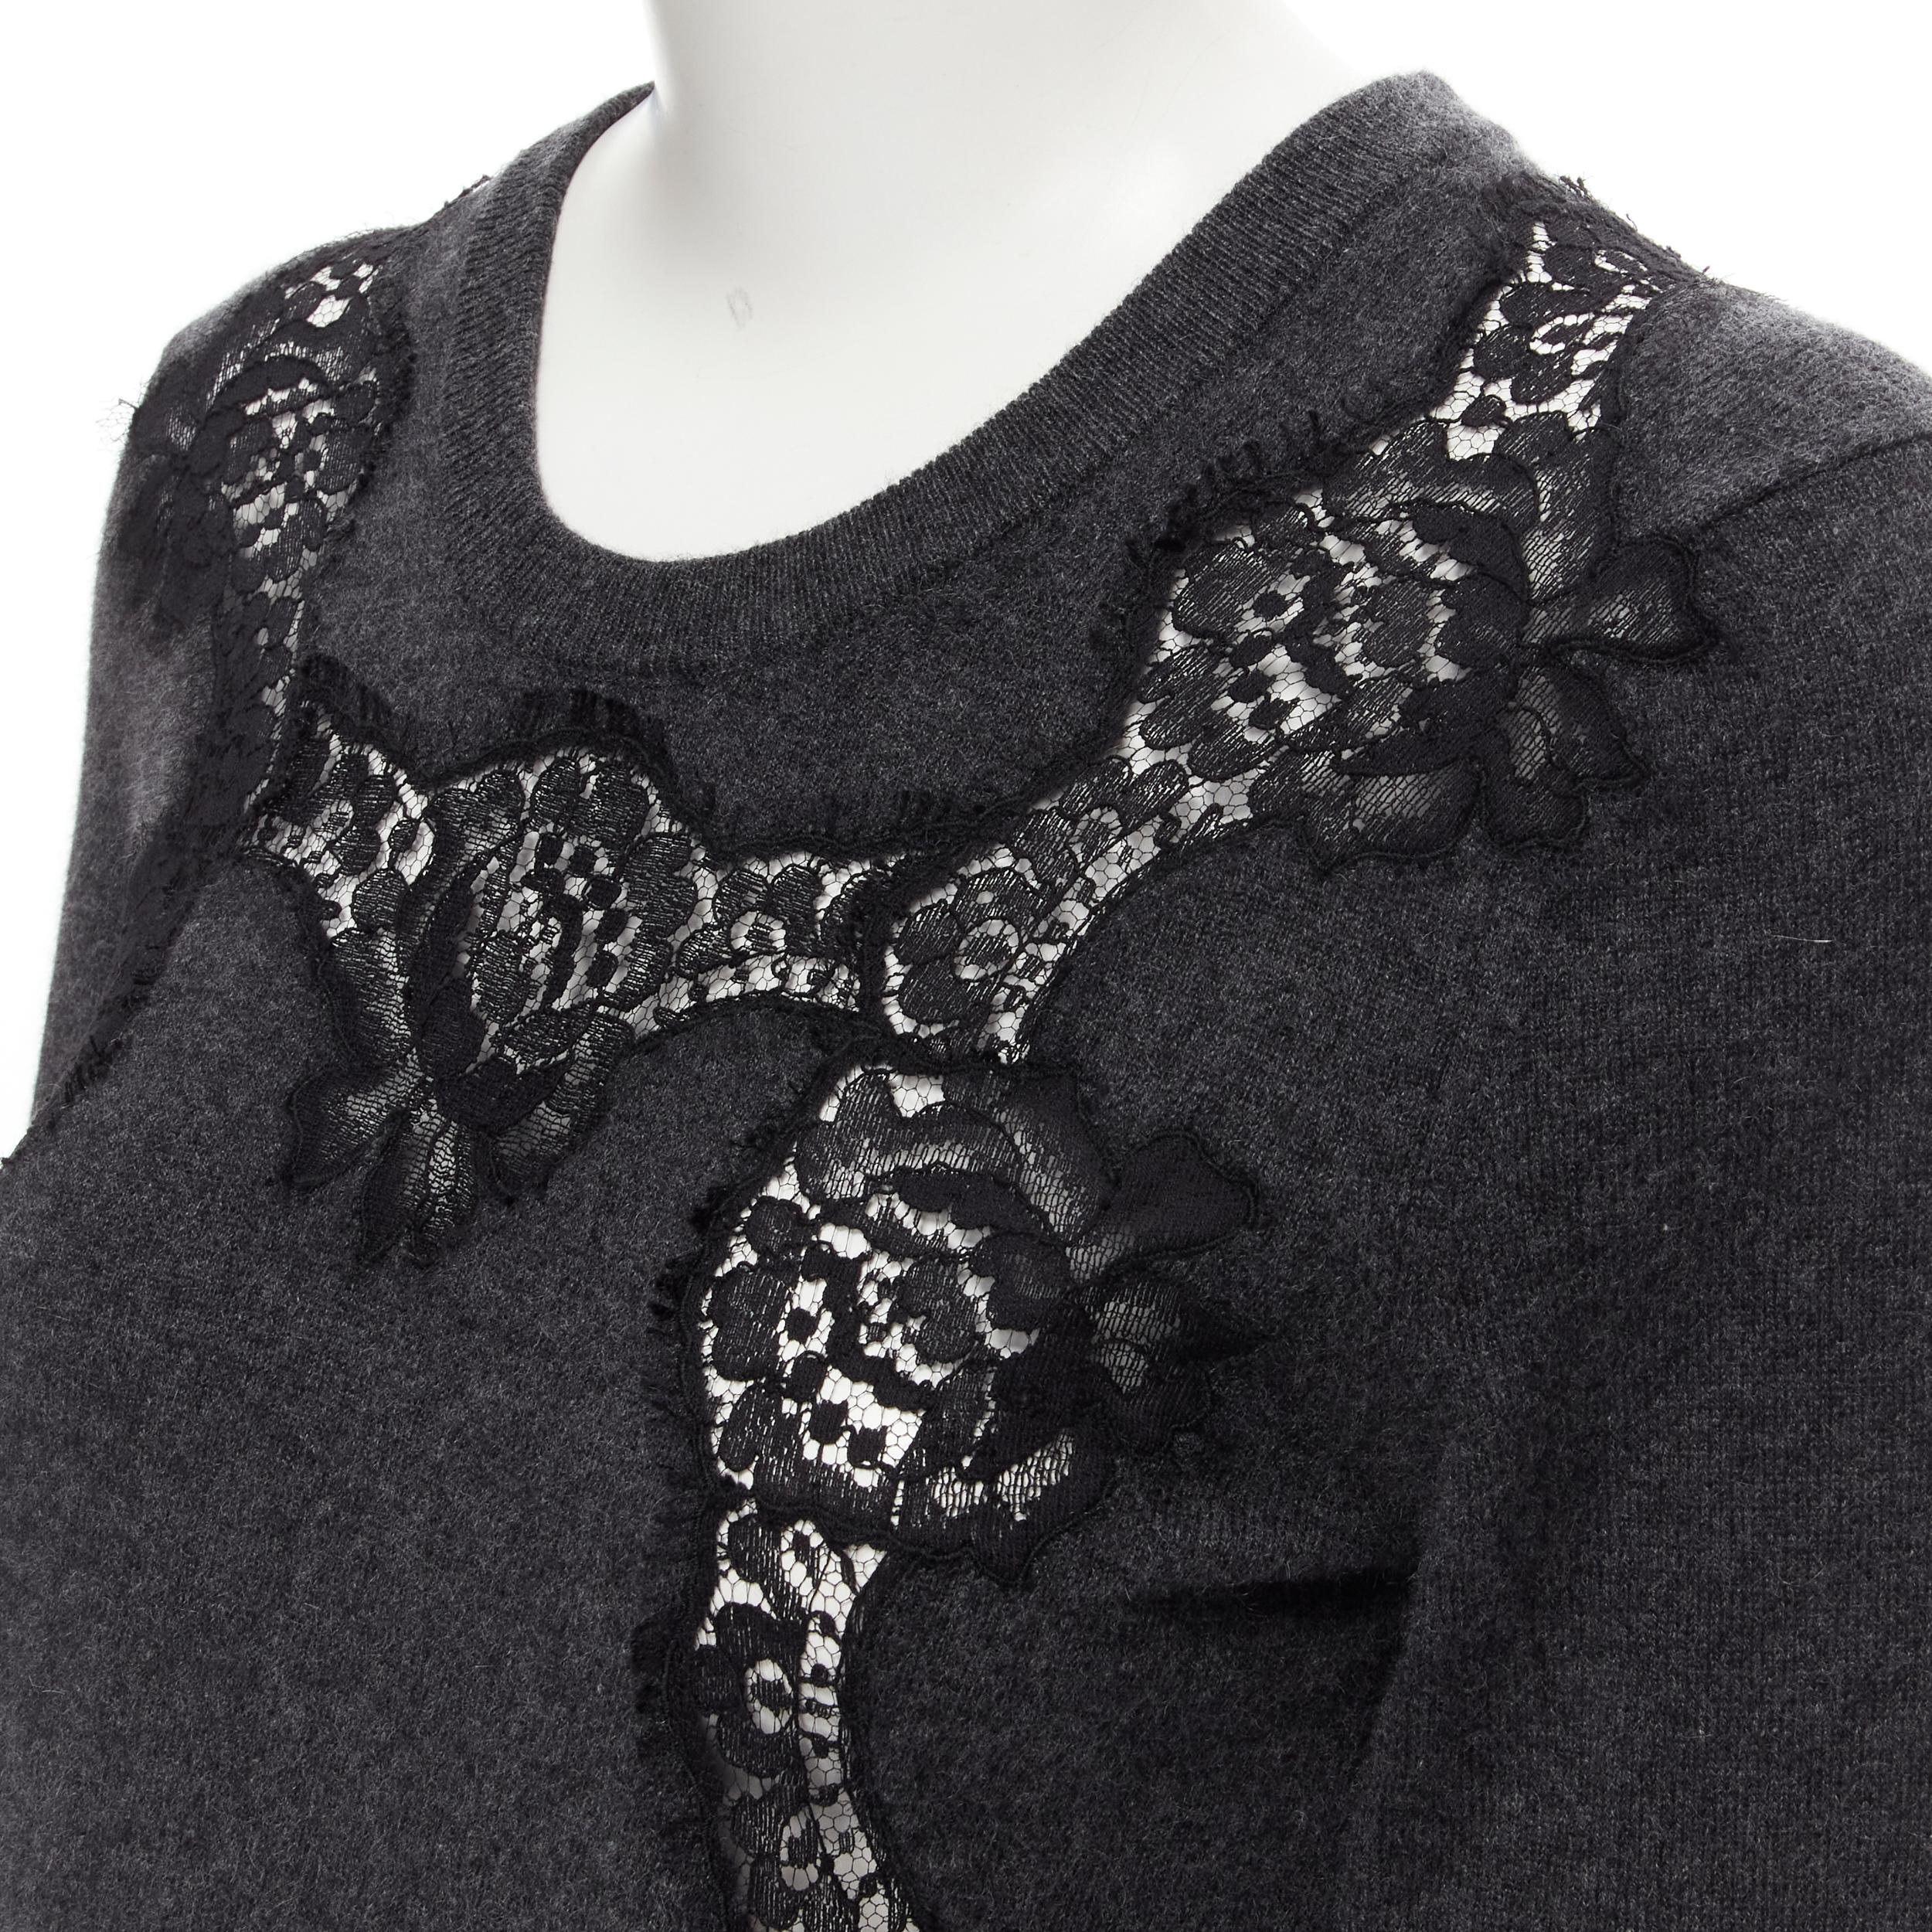 DOLCE GABBANA 100% cashmere grey black floral lace insert pullover sweater IT44 M
Reference: MELK/A00047 
Brand: Dolce Gabbana 
Material: Cashmere 
Color: Grey 
Pattern: Solid 
Extra Detail: Floral lace applique. 
Made in: Italy 

CONDITION: